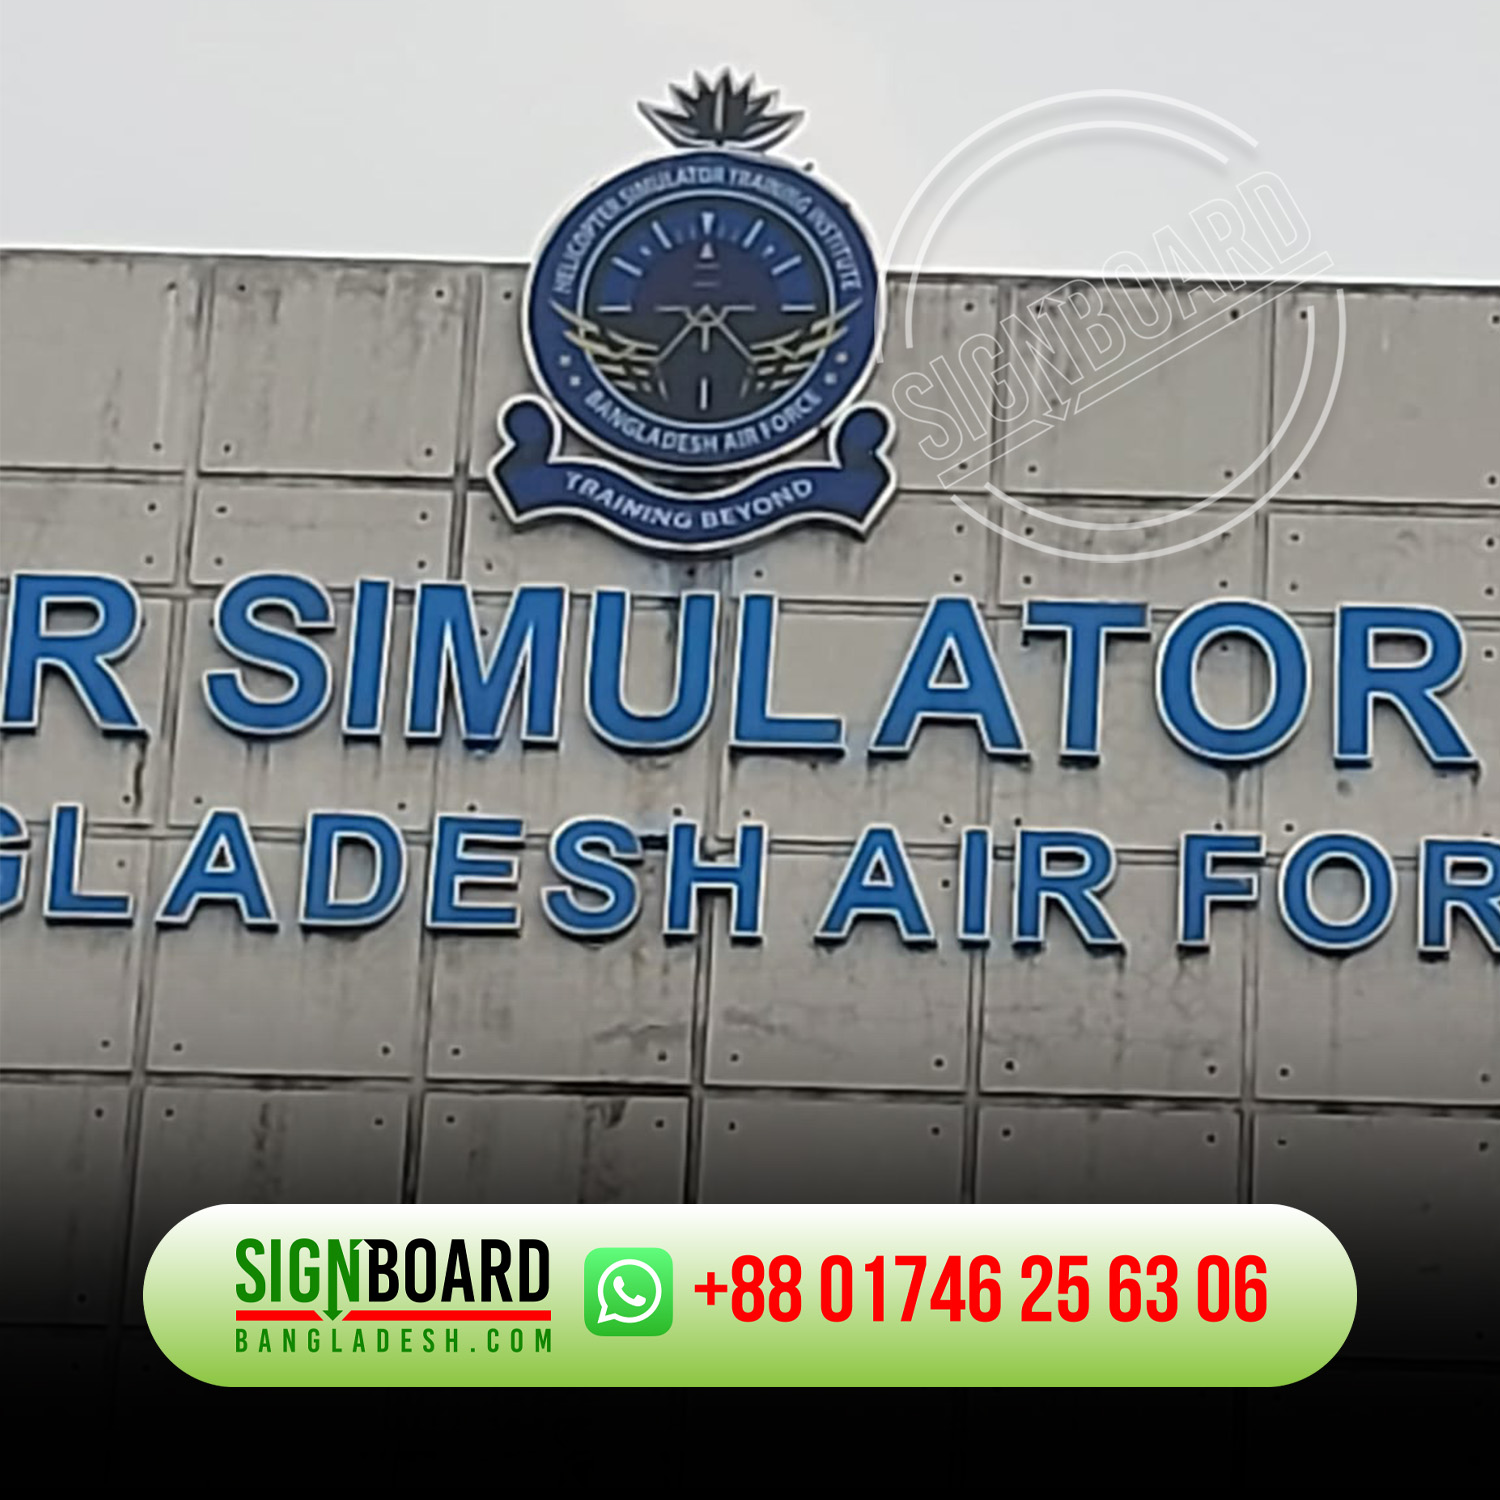 SS LETTER SIGNAGE FACTORY BANGLADESH Stainless Steel LettersSS Signboard Manufacturer. Stainless Steel Letters' Signboard Manufacturer | মিরপুর. Motivate Solution Rectangular SS Letter Sign Board. Stainless Steel Letters Sign Board Design Company. 3d Stainless Steel Letter Signage. Factory Signs Manufacturer Custom Illuminated Painting BD. Stainless Steel Letters Signage Maker in Bangladesh. Stainless Steel Letters Manufacturer in Gurgaon - 3d Led Signs. Stainless Steel Letters Signage Maker in Dhaka. SS Bata Module Letter Signage in BD. Backlit Stainless Steel Letters LED Logo Sign Manufacturer. SS Letter Stainless Steel Letter Manufacturer from New Dhaka.